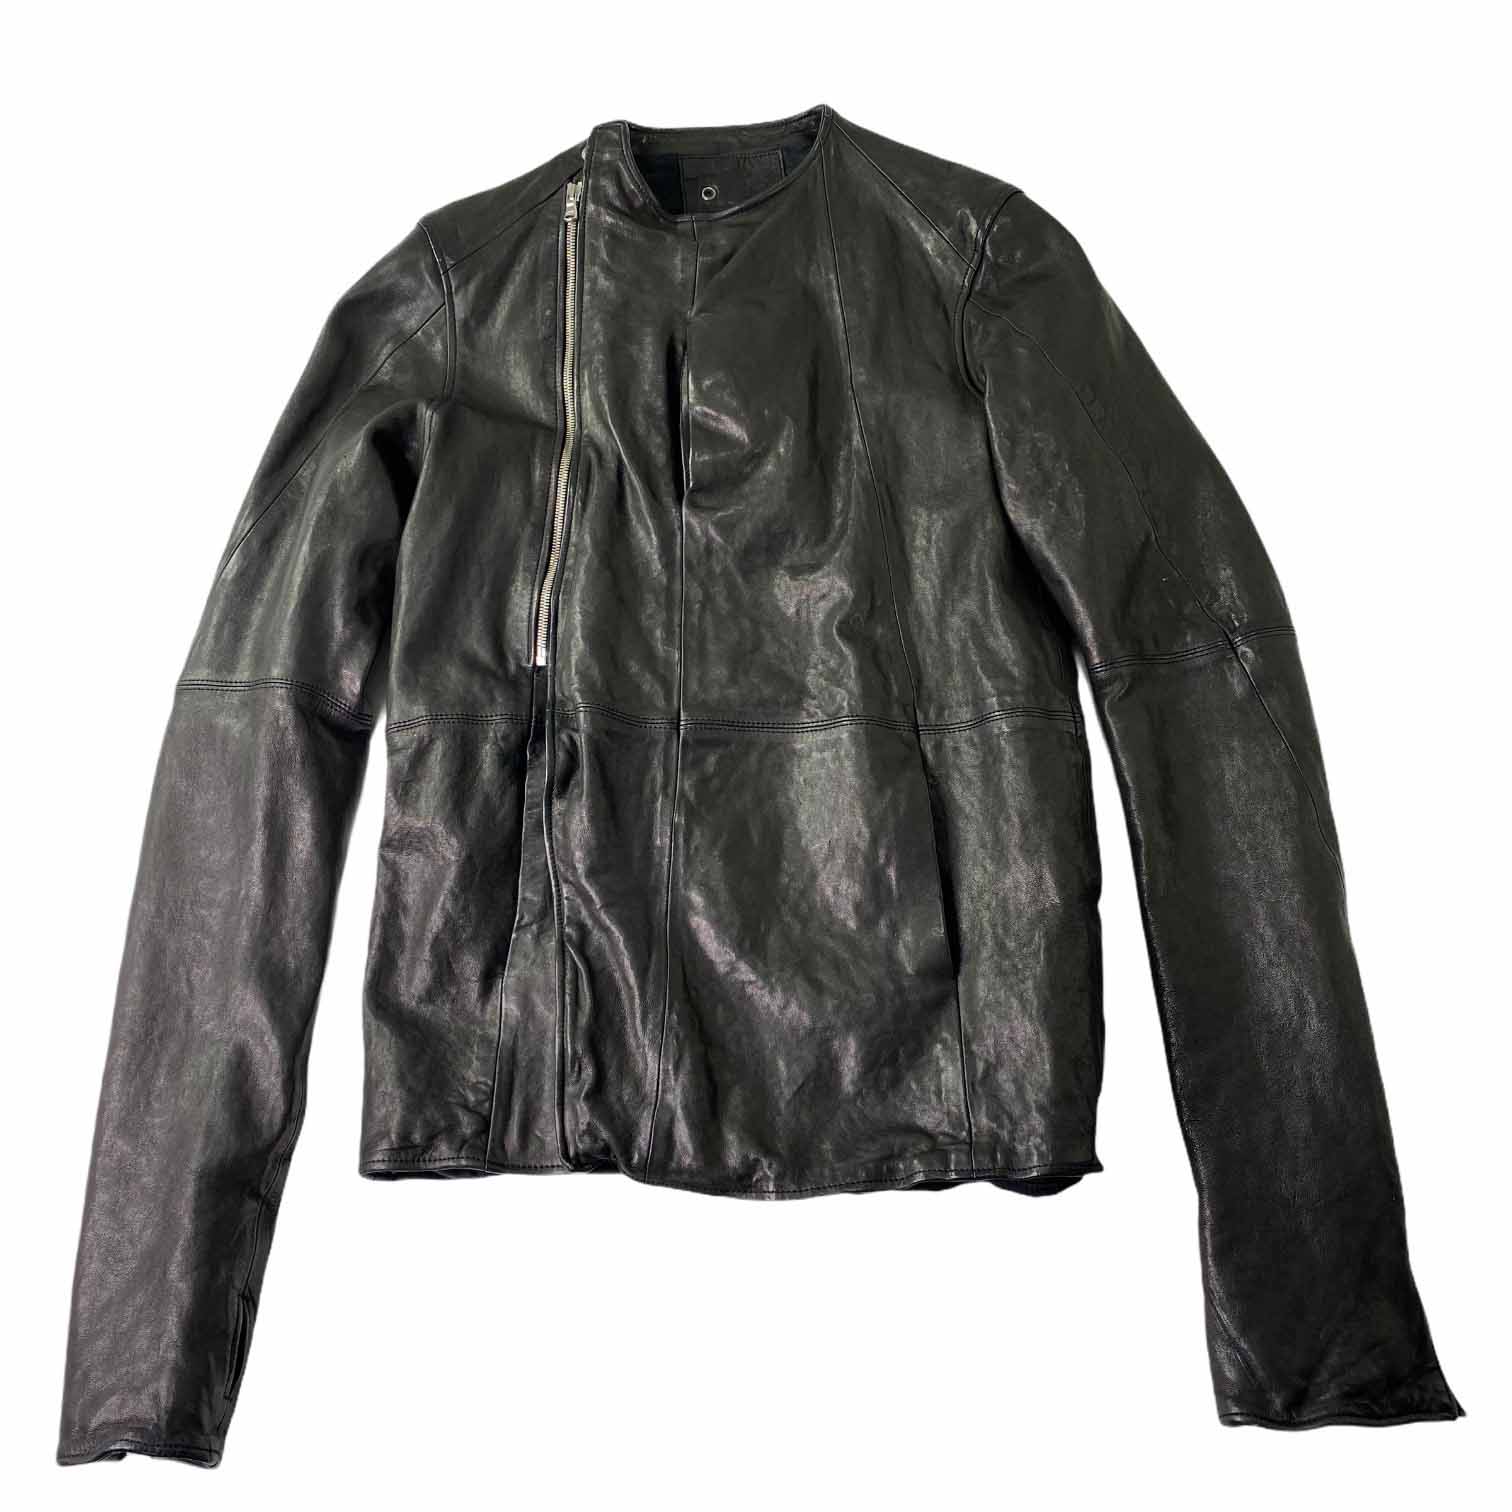 [Chaos From Undermind] Round Neck Leather Jacket BK - Size Free